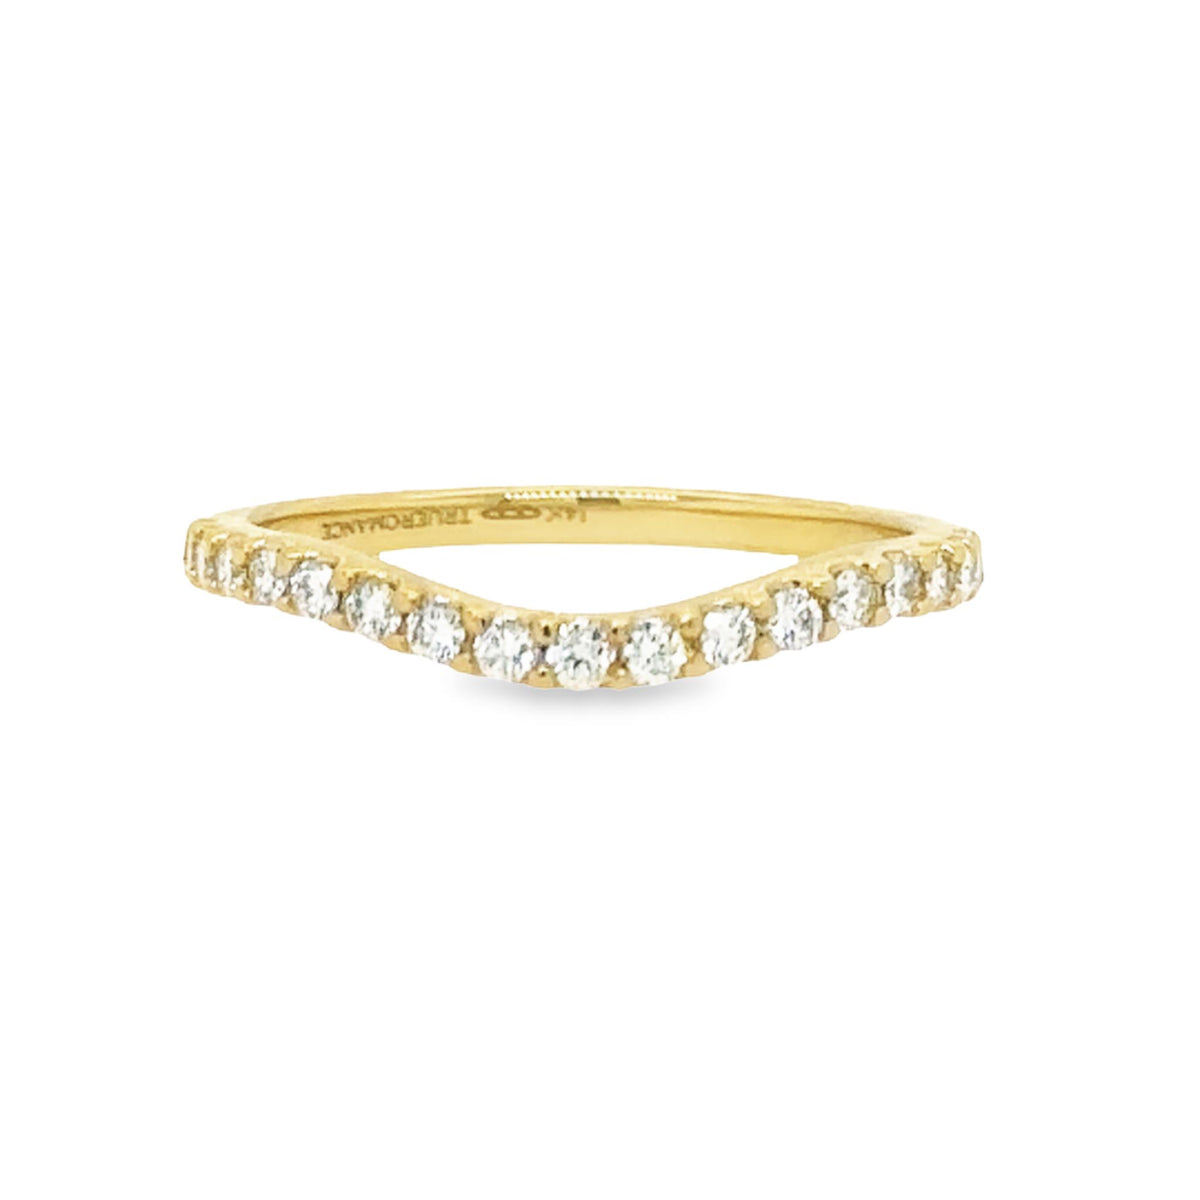 14Kt Yellow Gold Curved Wedding Ring With 0.26cttw Natural Diamonds